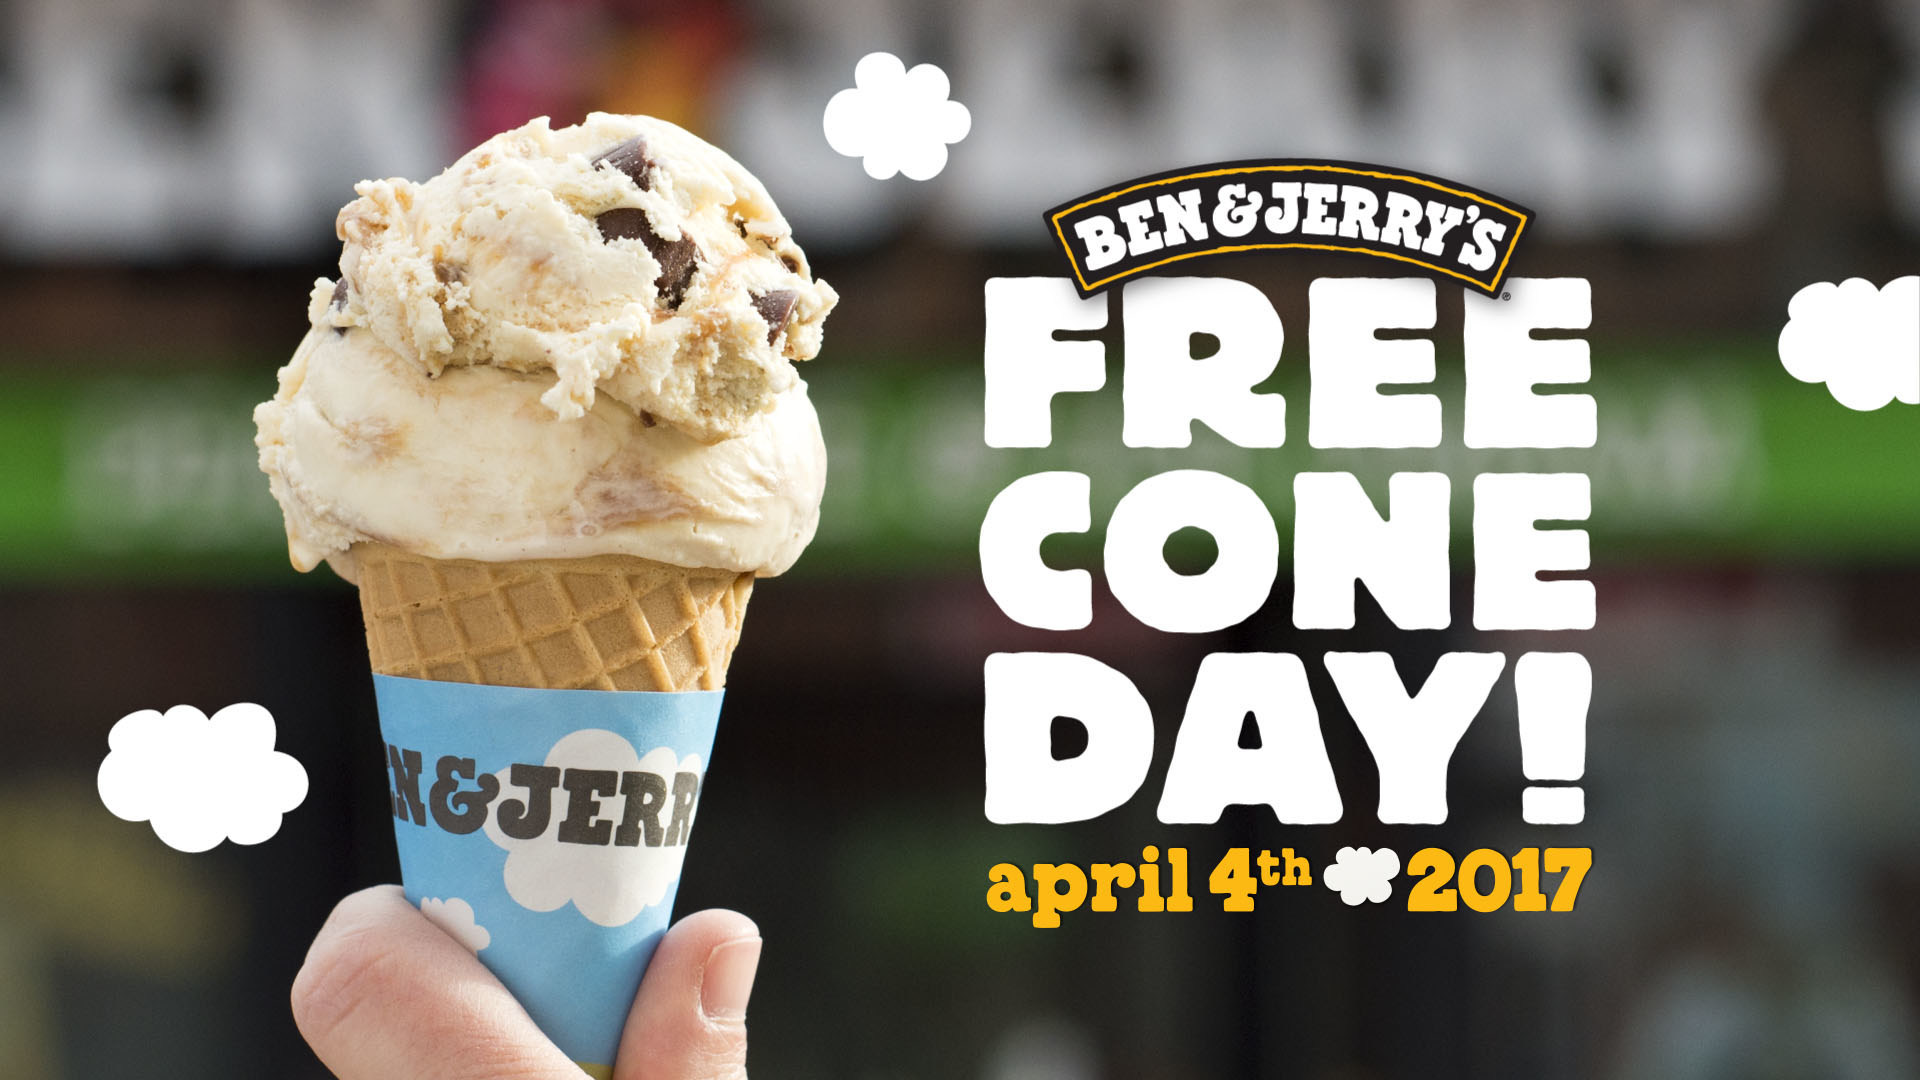 Thank Goodness For Ben & Jerry's Free Cone Day (April 4) | LATF USA NEWS